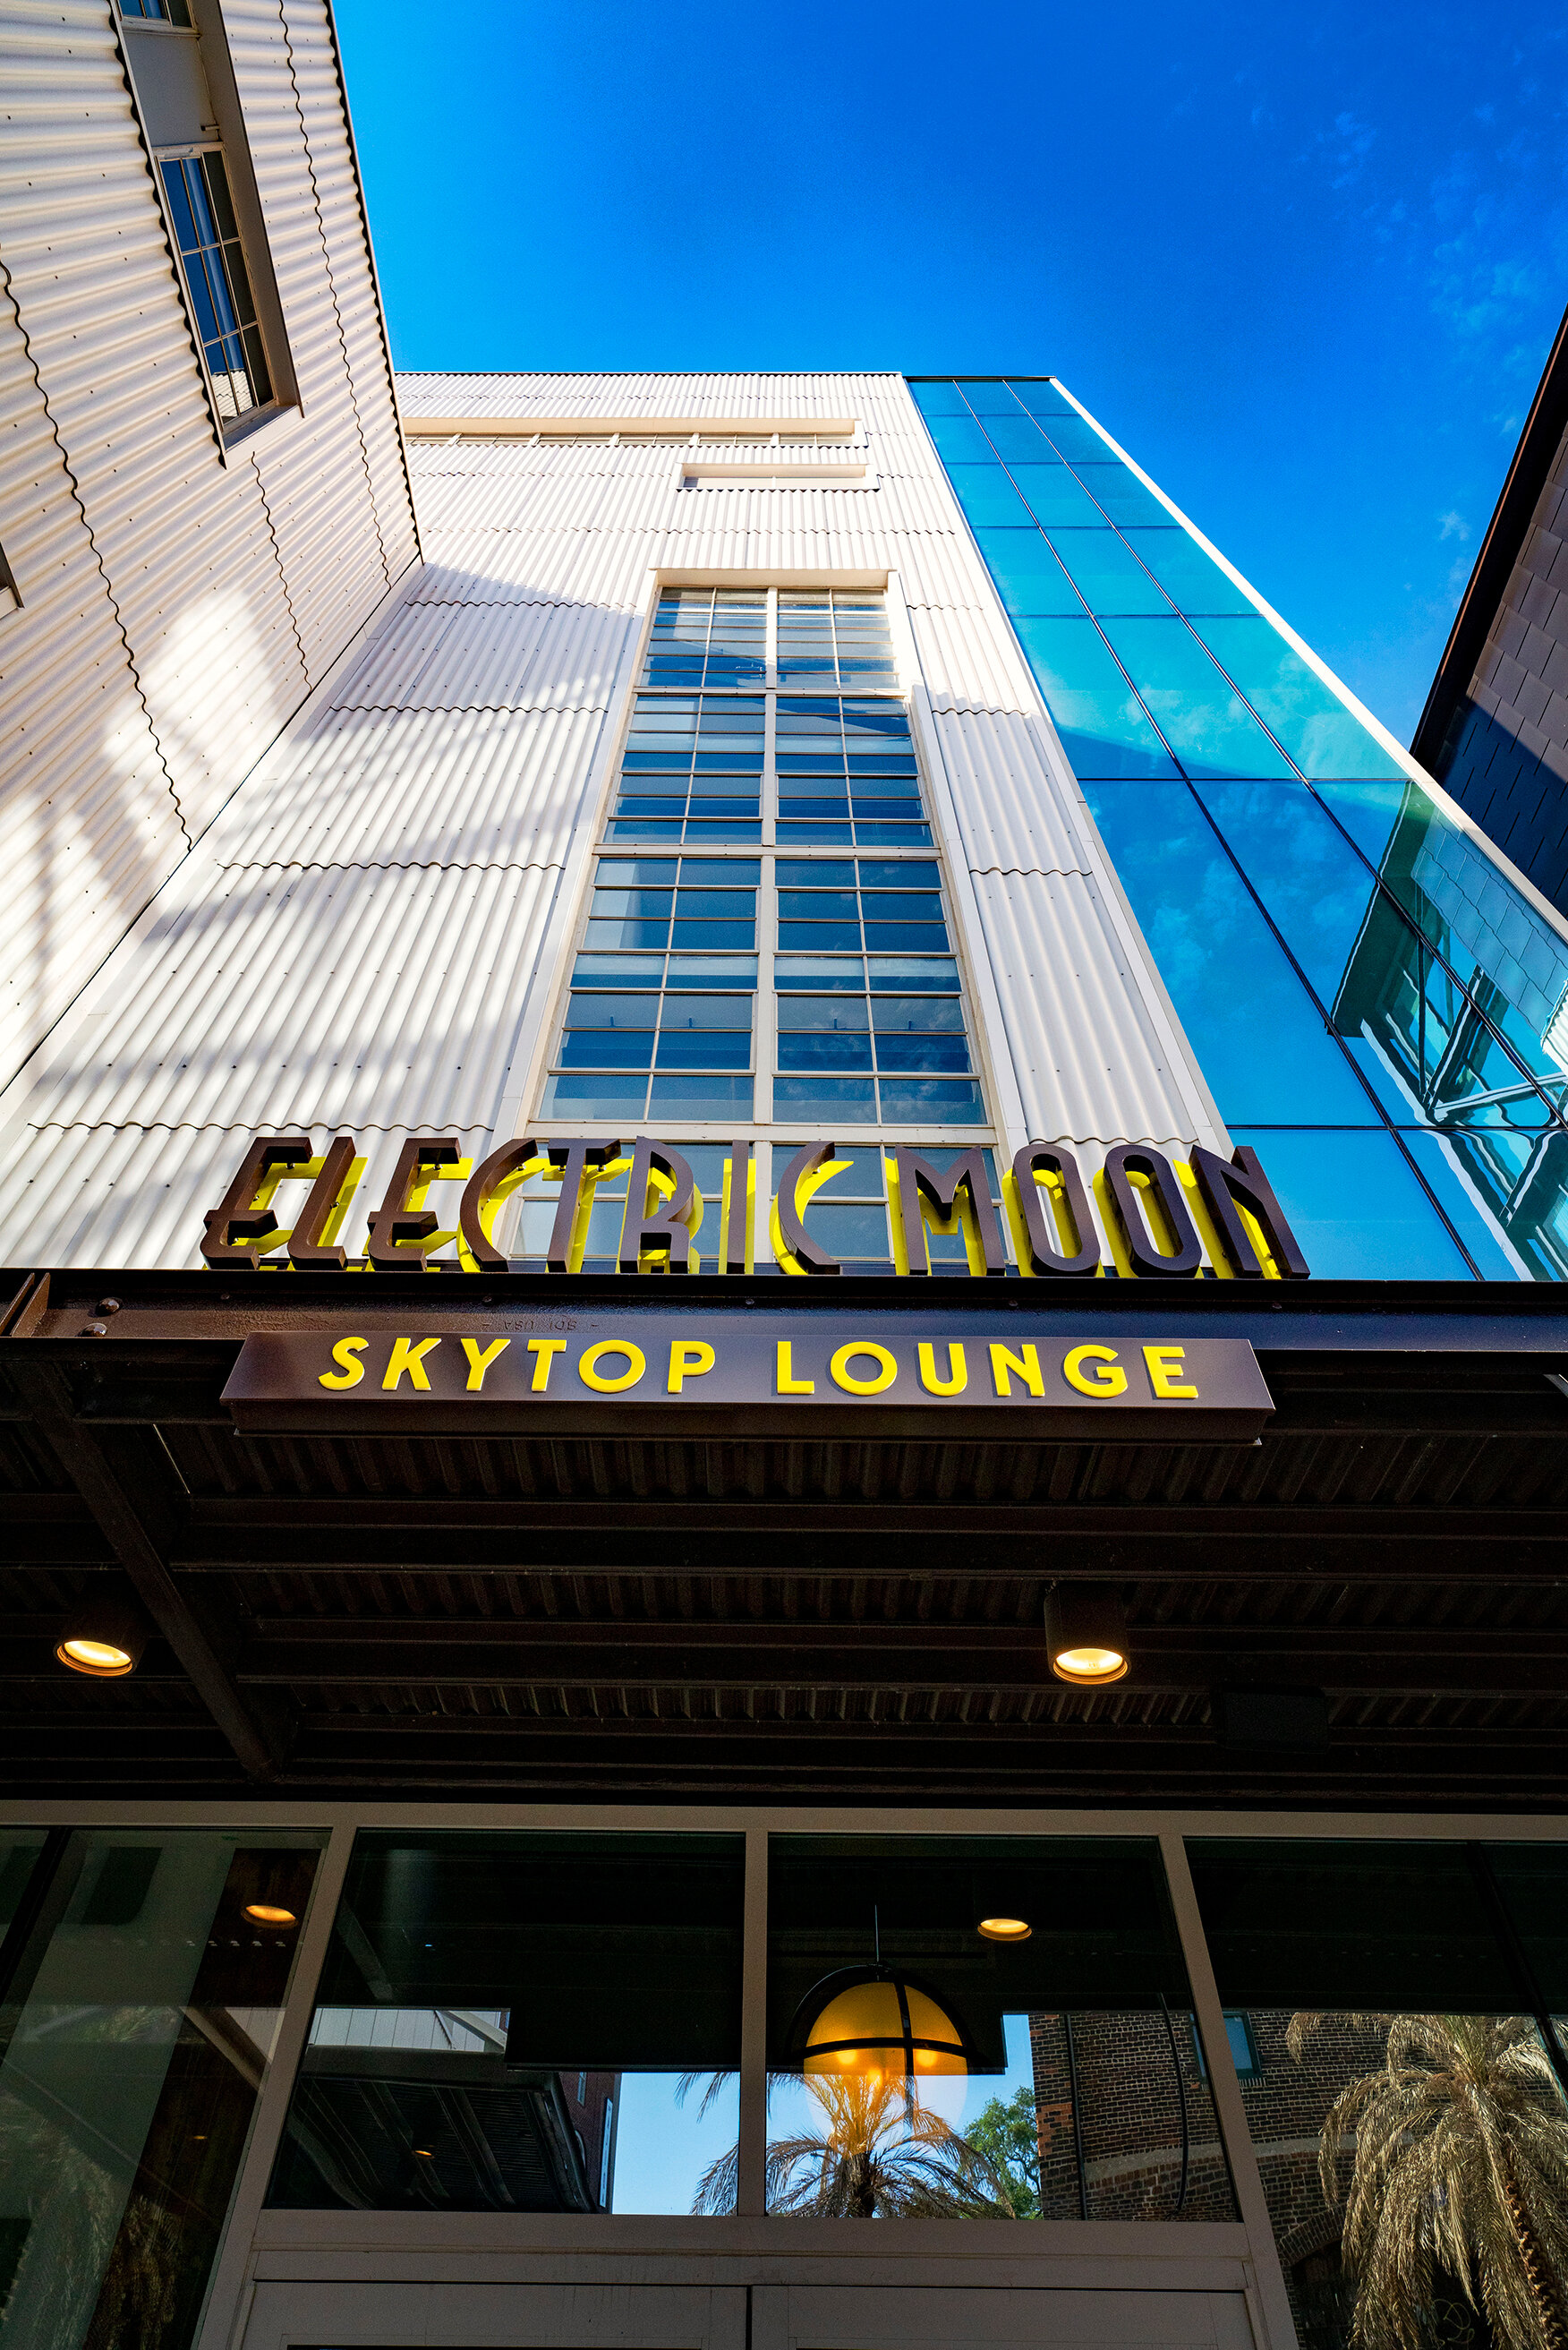 Entrance of Electric Moon Skytop Lounge at JW MARRIOTT SAVANNAH PLANT RIVERSIDE DISTRICT POWER PLANT HOTEL 